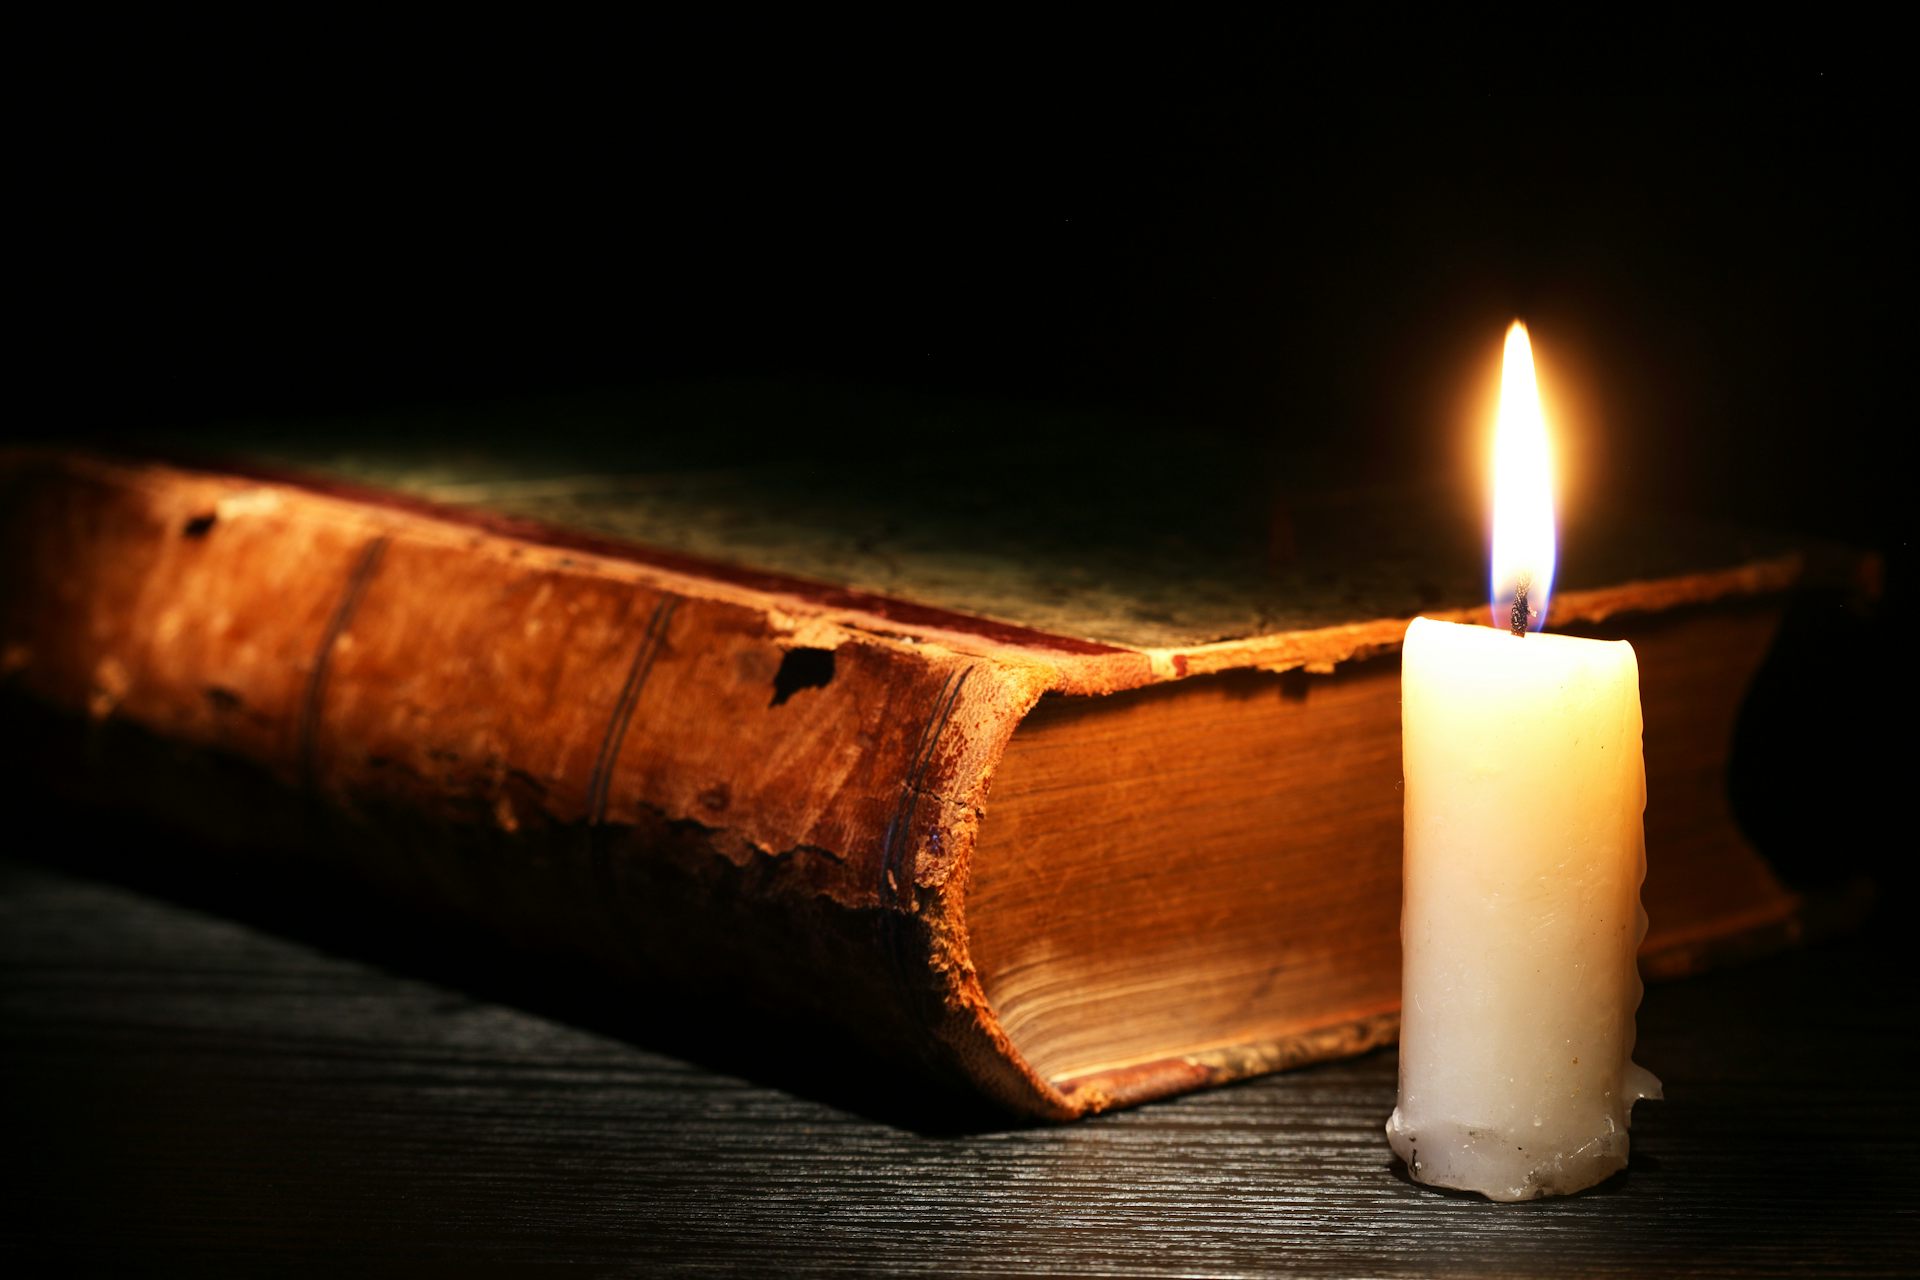 A candle next to a book.